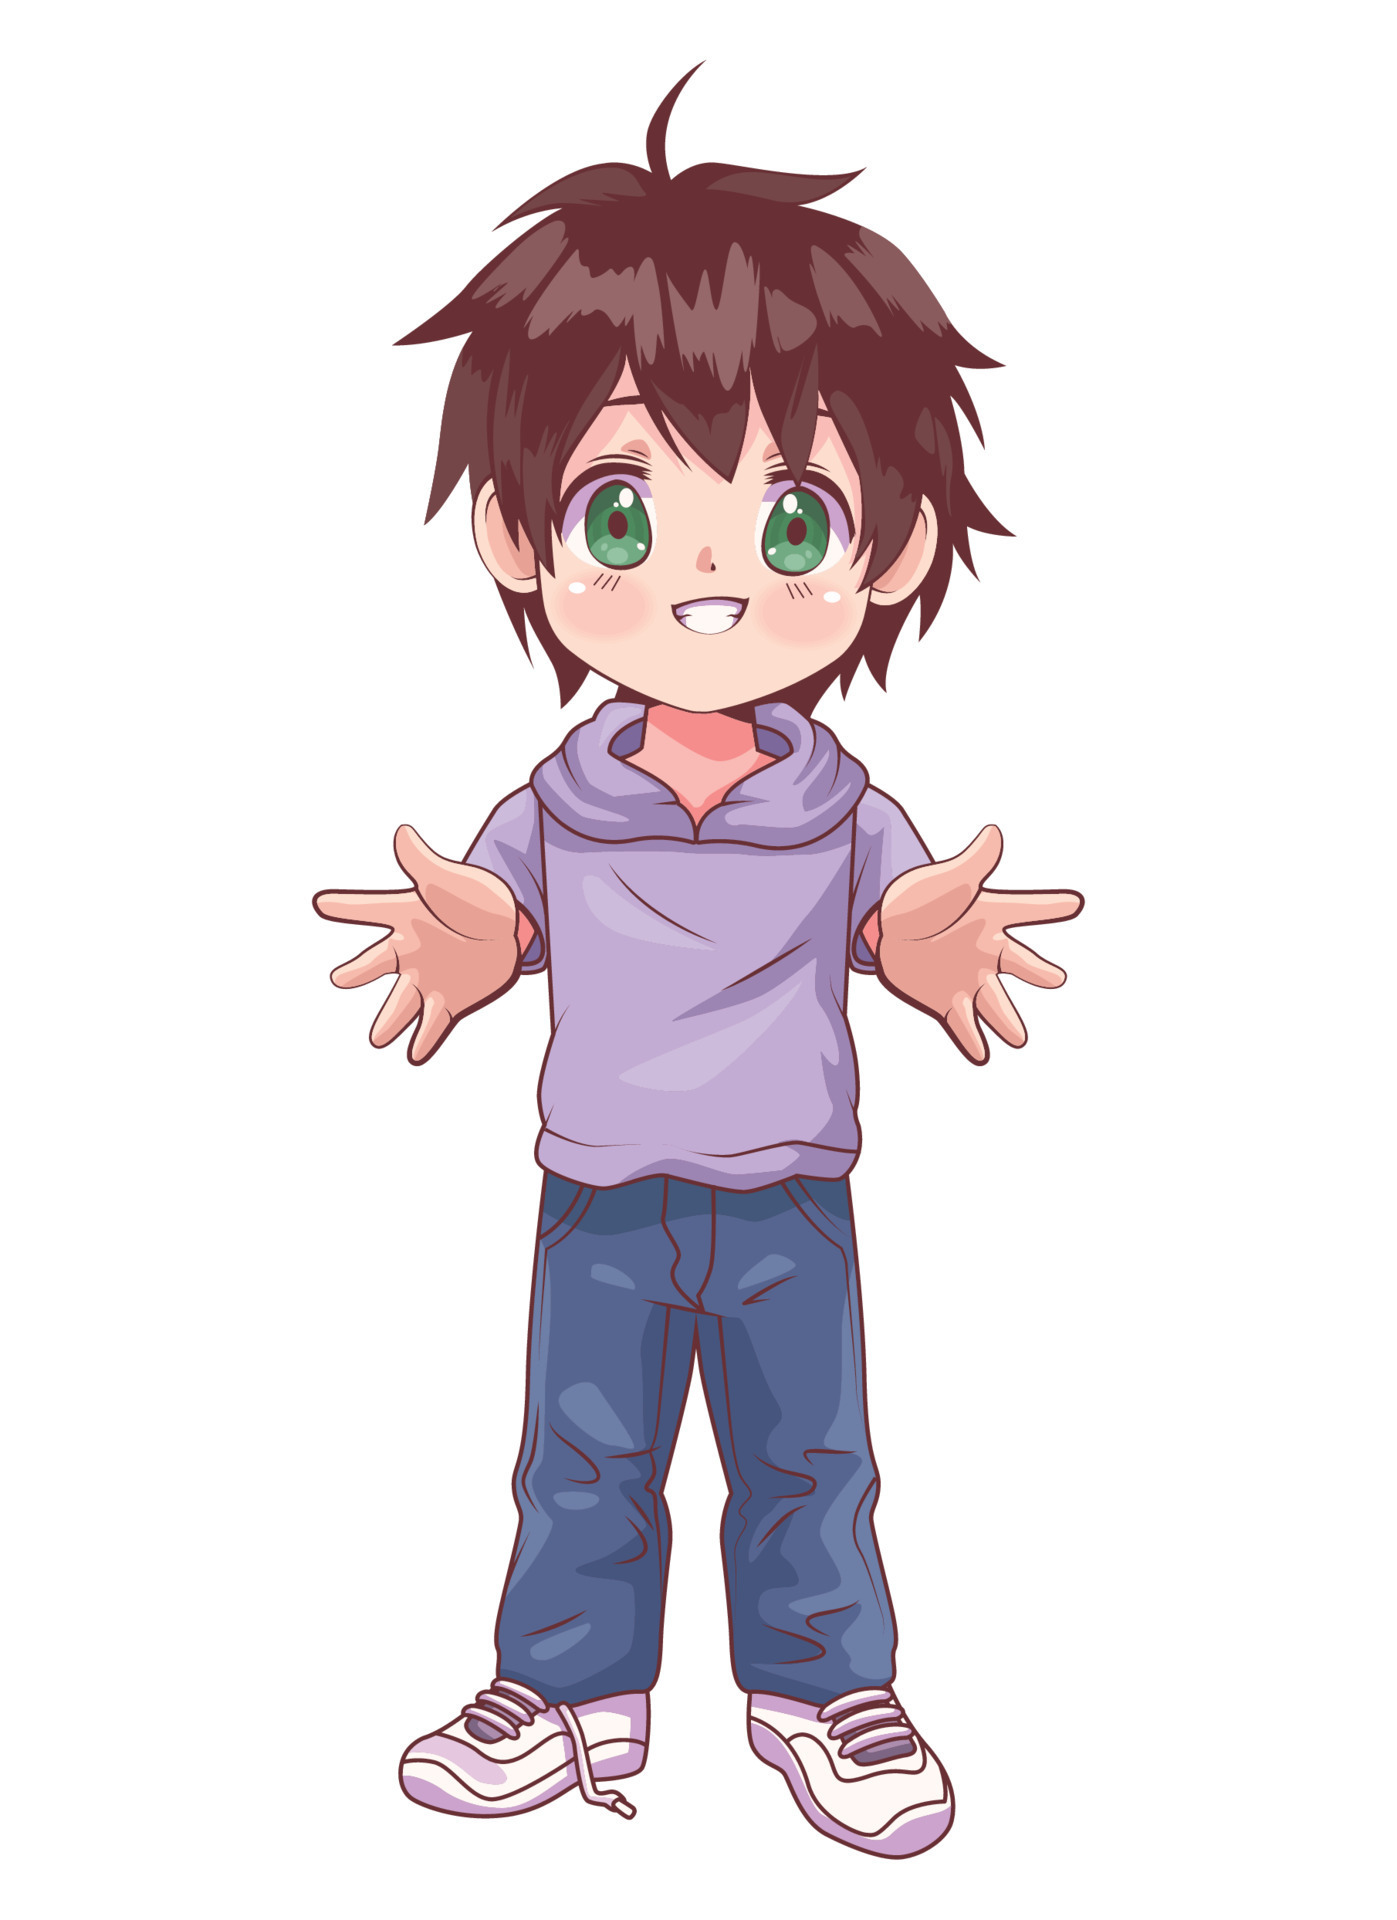 How To Draw An Anime Boy For Kids Step by Step Drawing Guide by Dawn   DragoArt